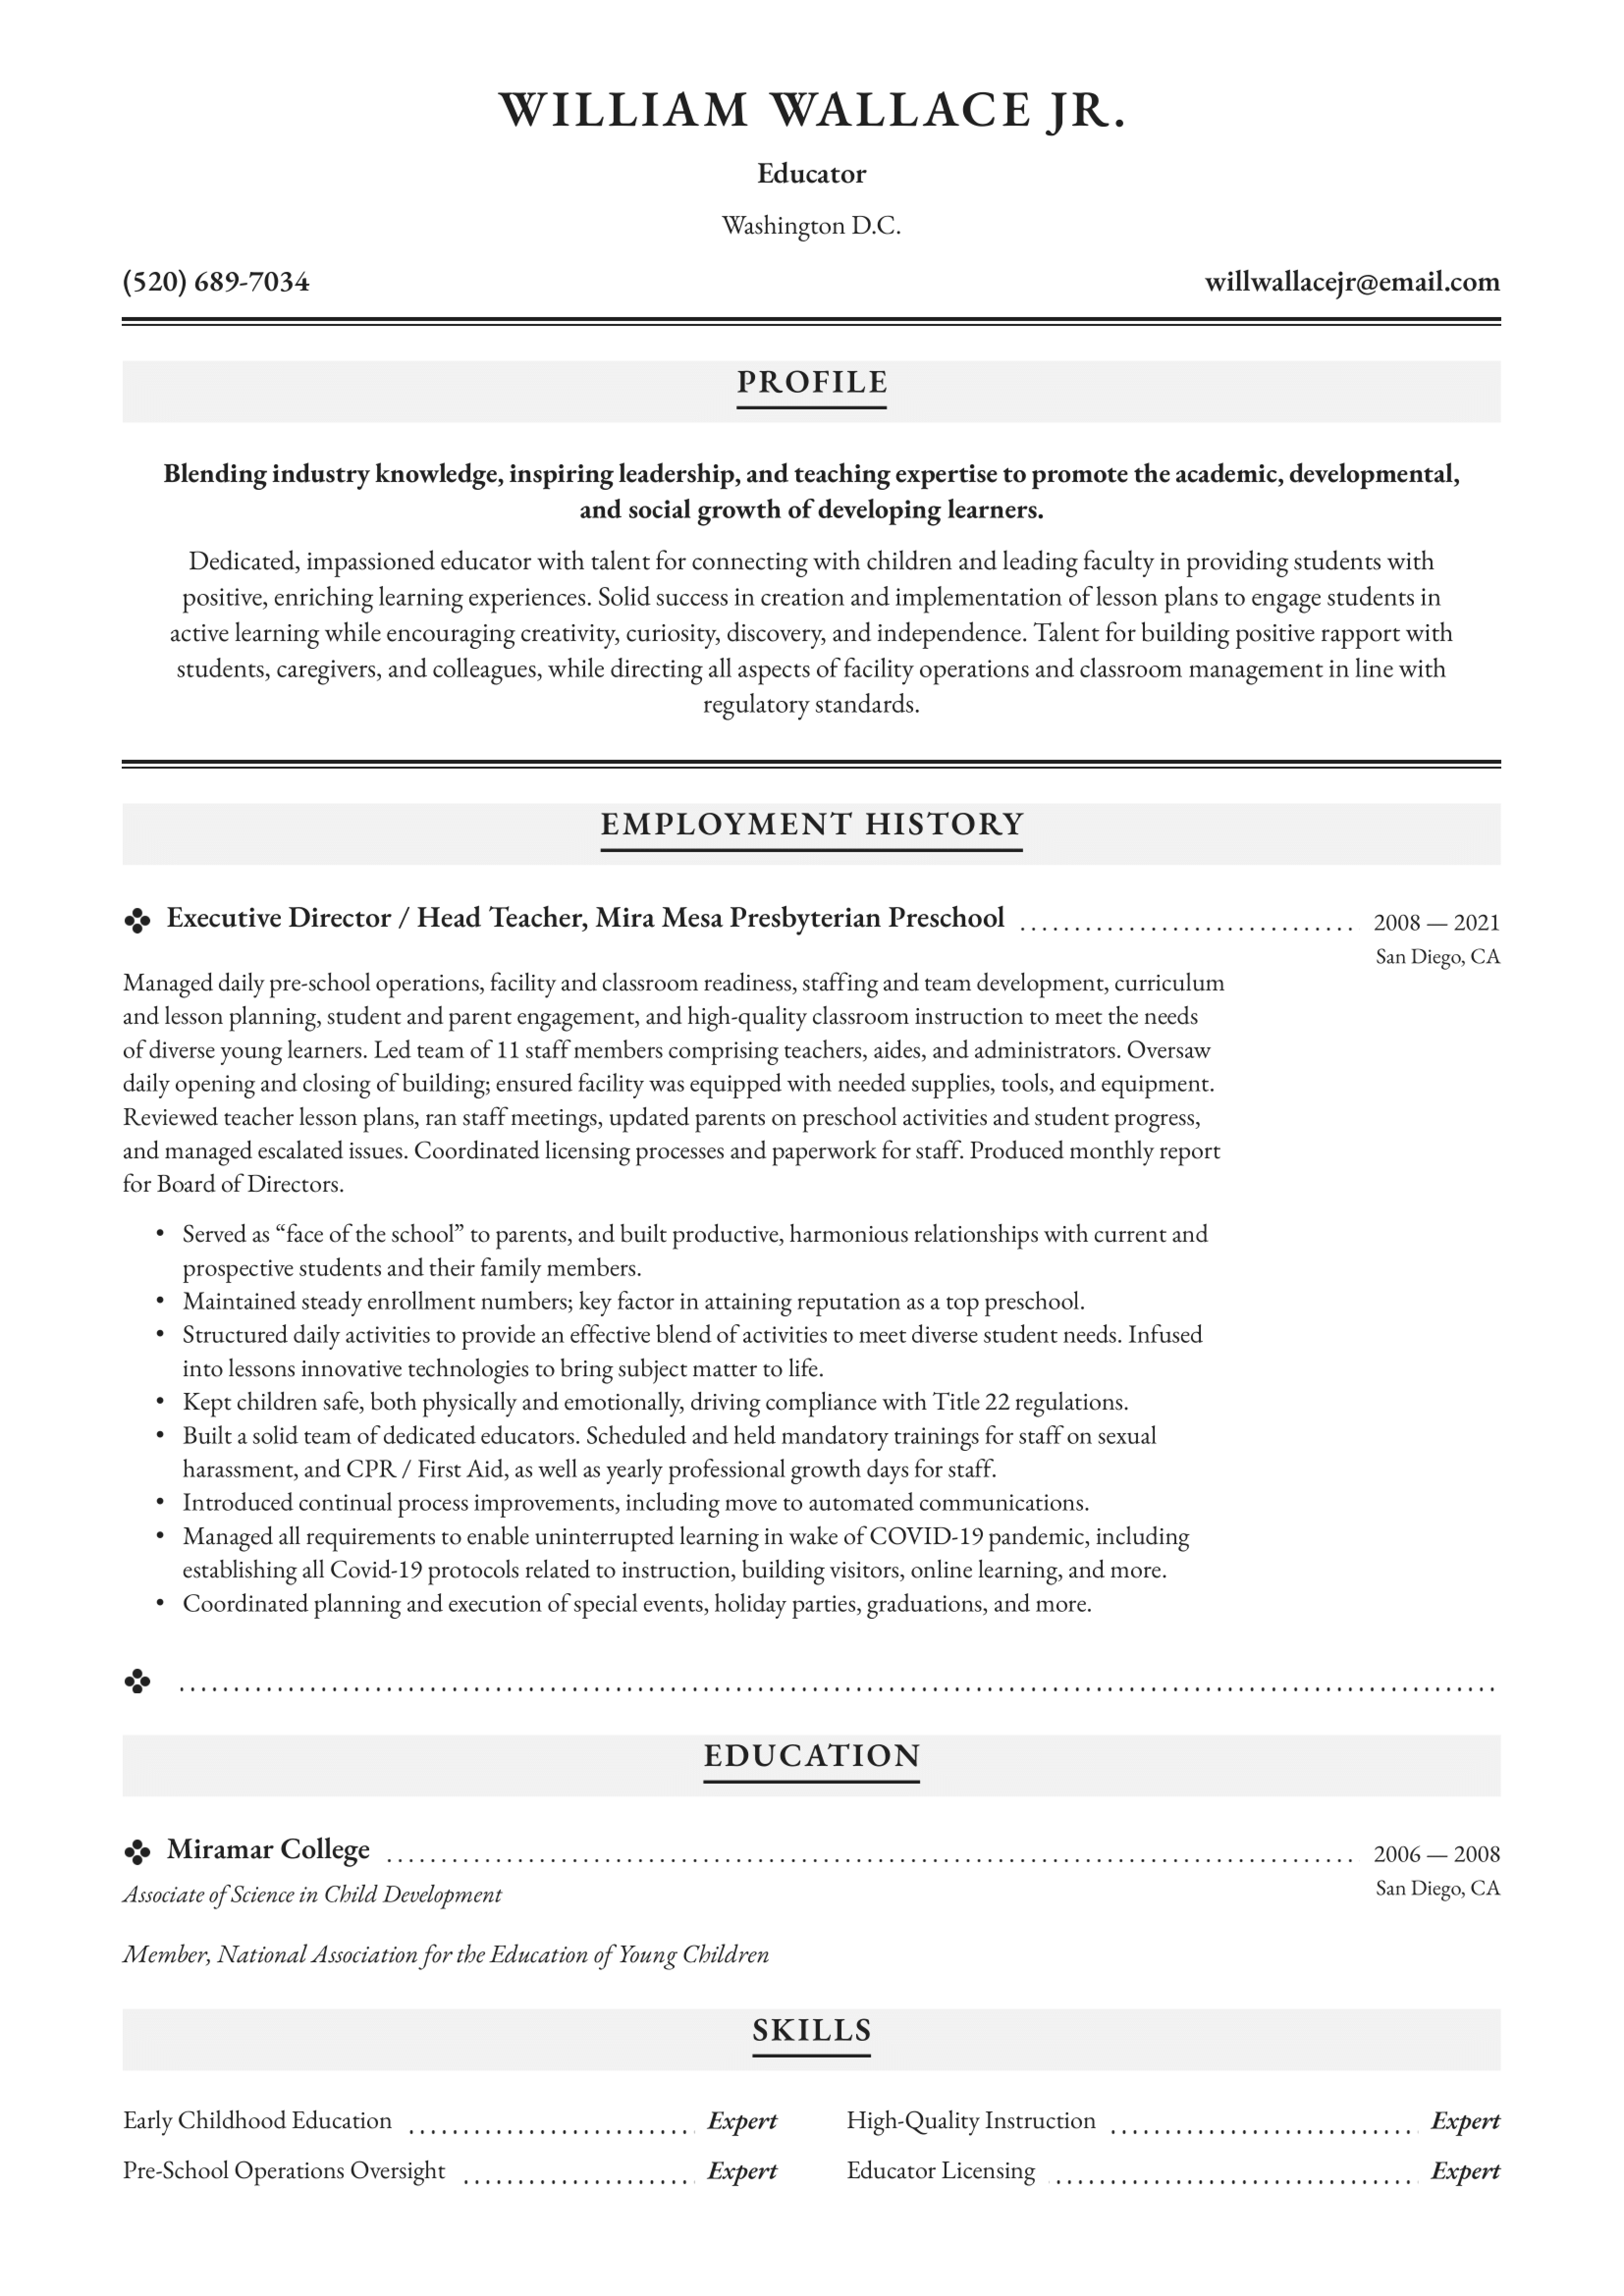 educator-resume-example.png